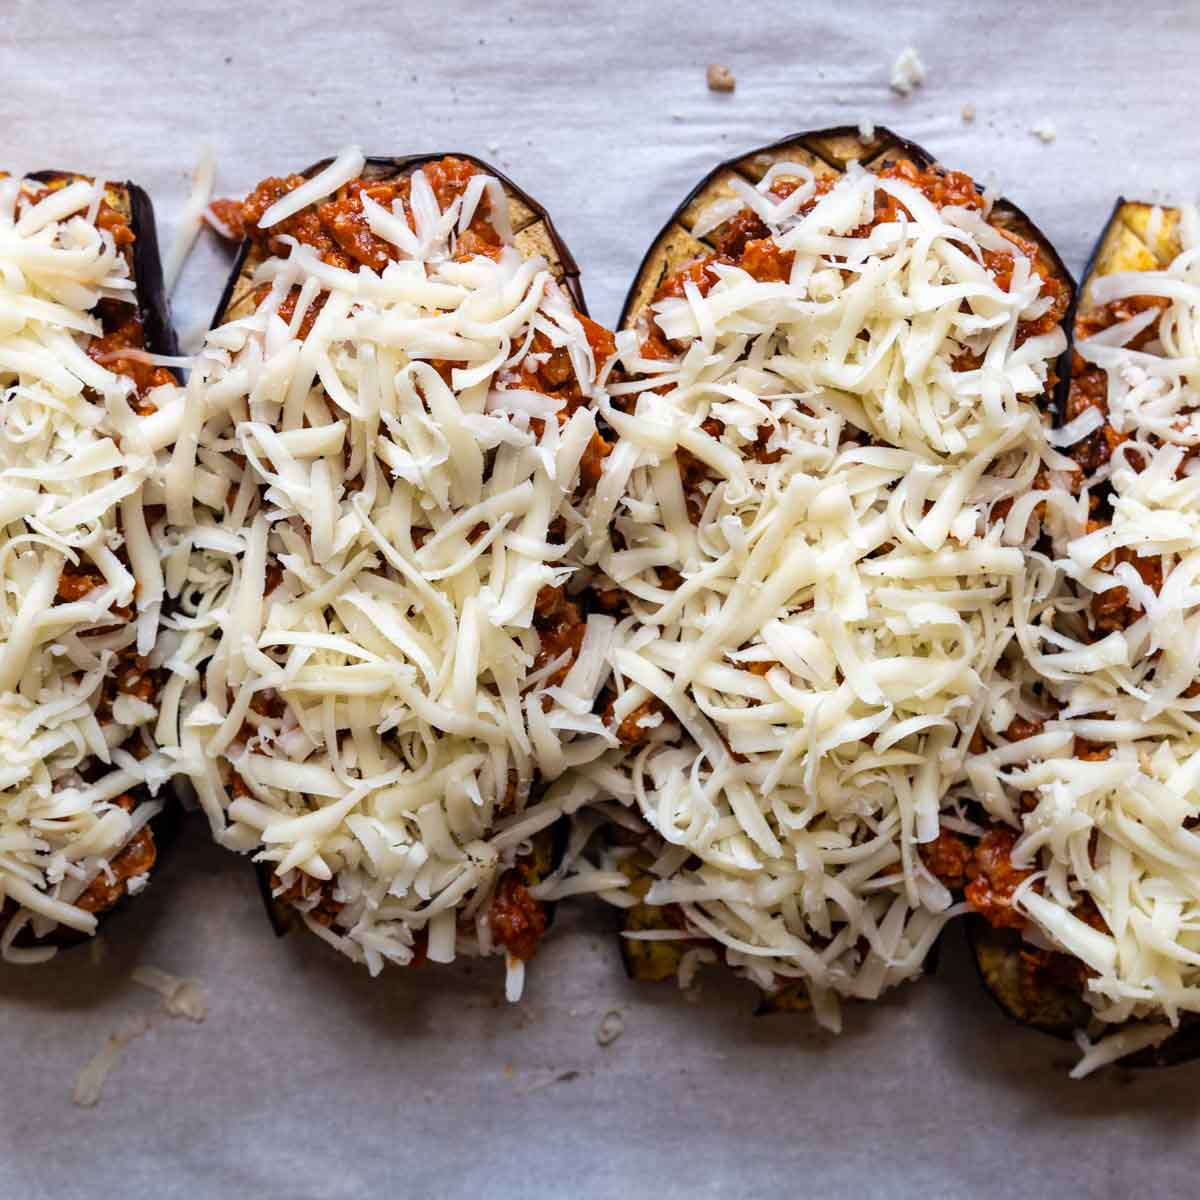 unbaked eggplant topped with cheese.